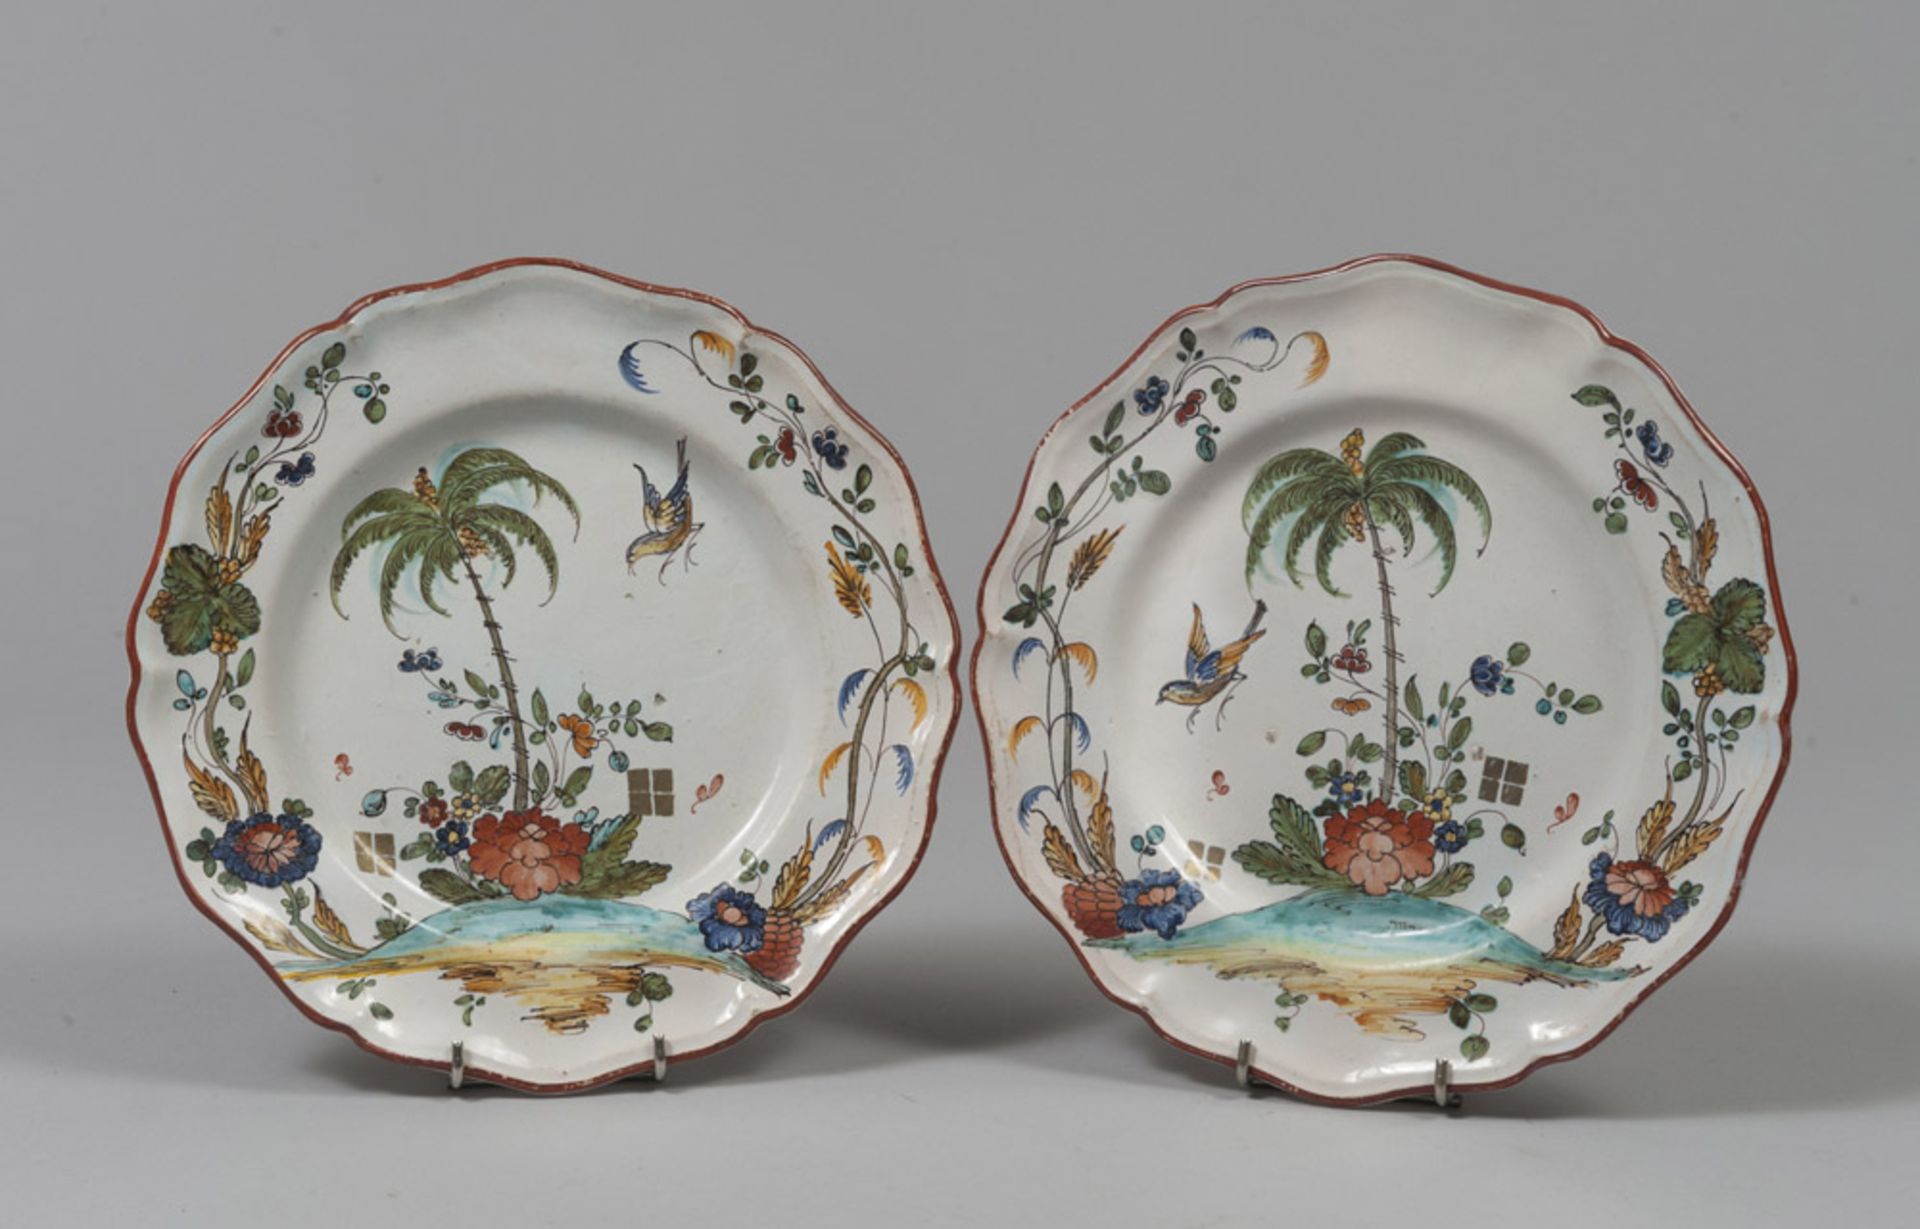 A PAIR OF MAIOLICA DISHES, NAPLES PROBABLY MANUFACTURY DEL VECCHIO, 18TH CENTURY